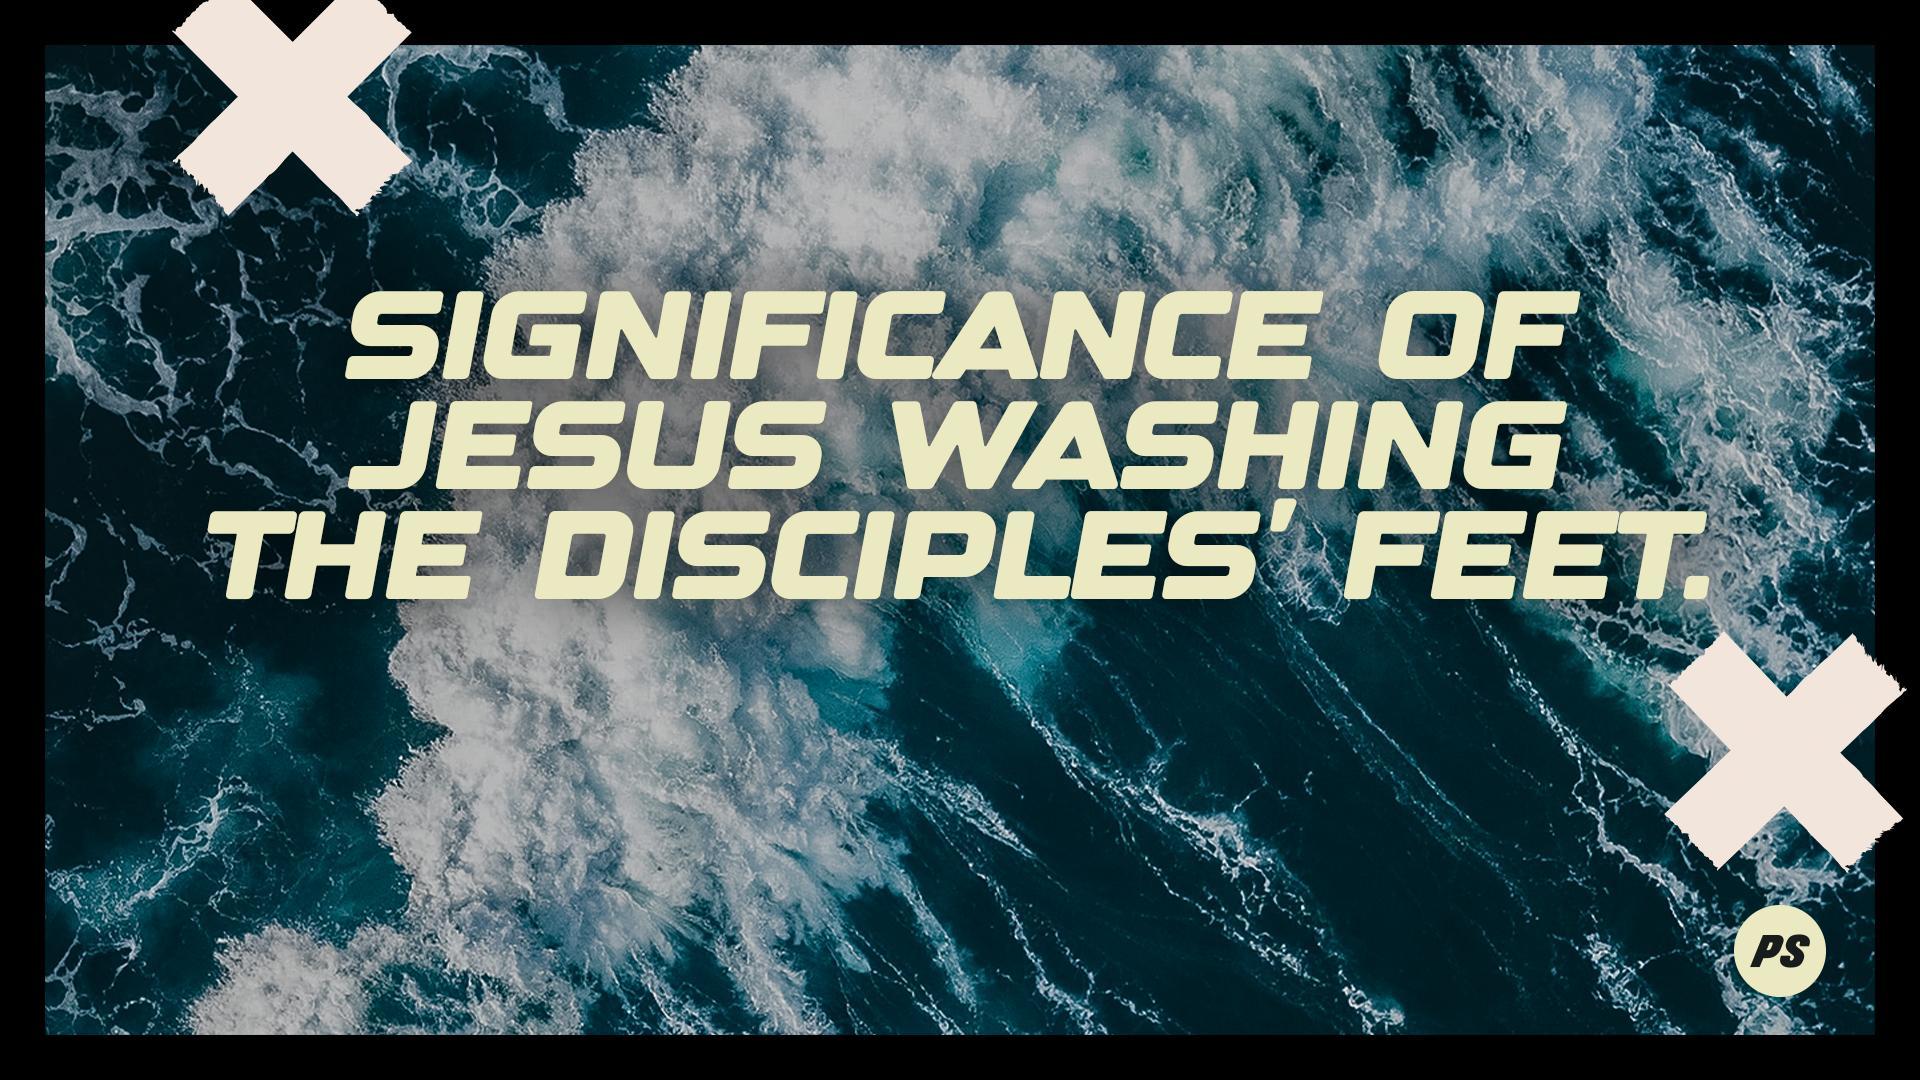 Featured image for “The significance of Jesus washing the disciples’ feet”